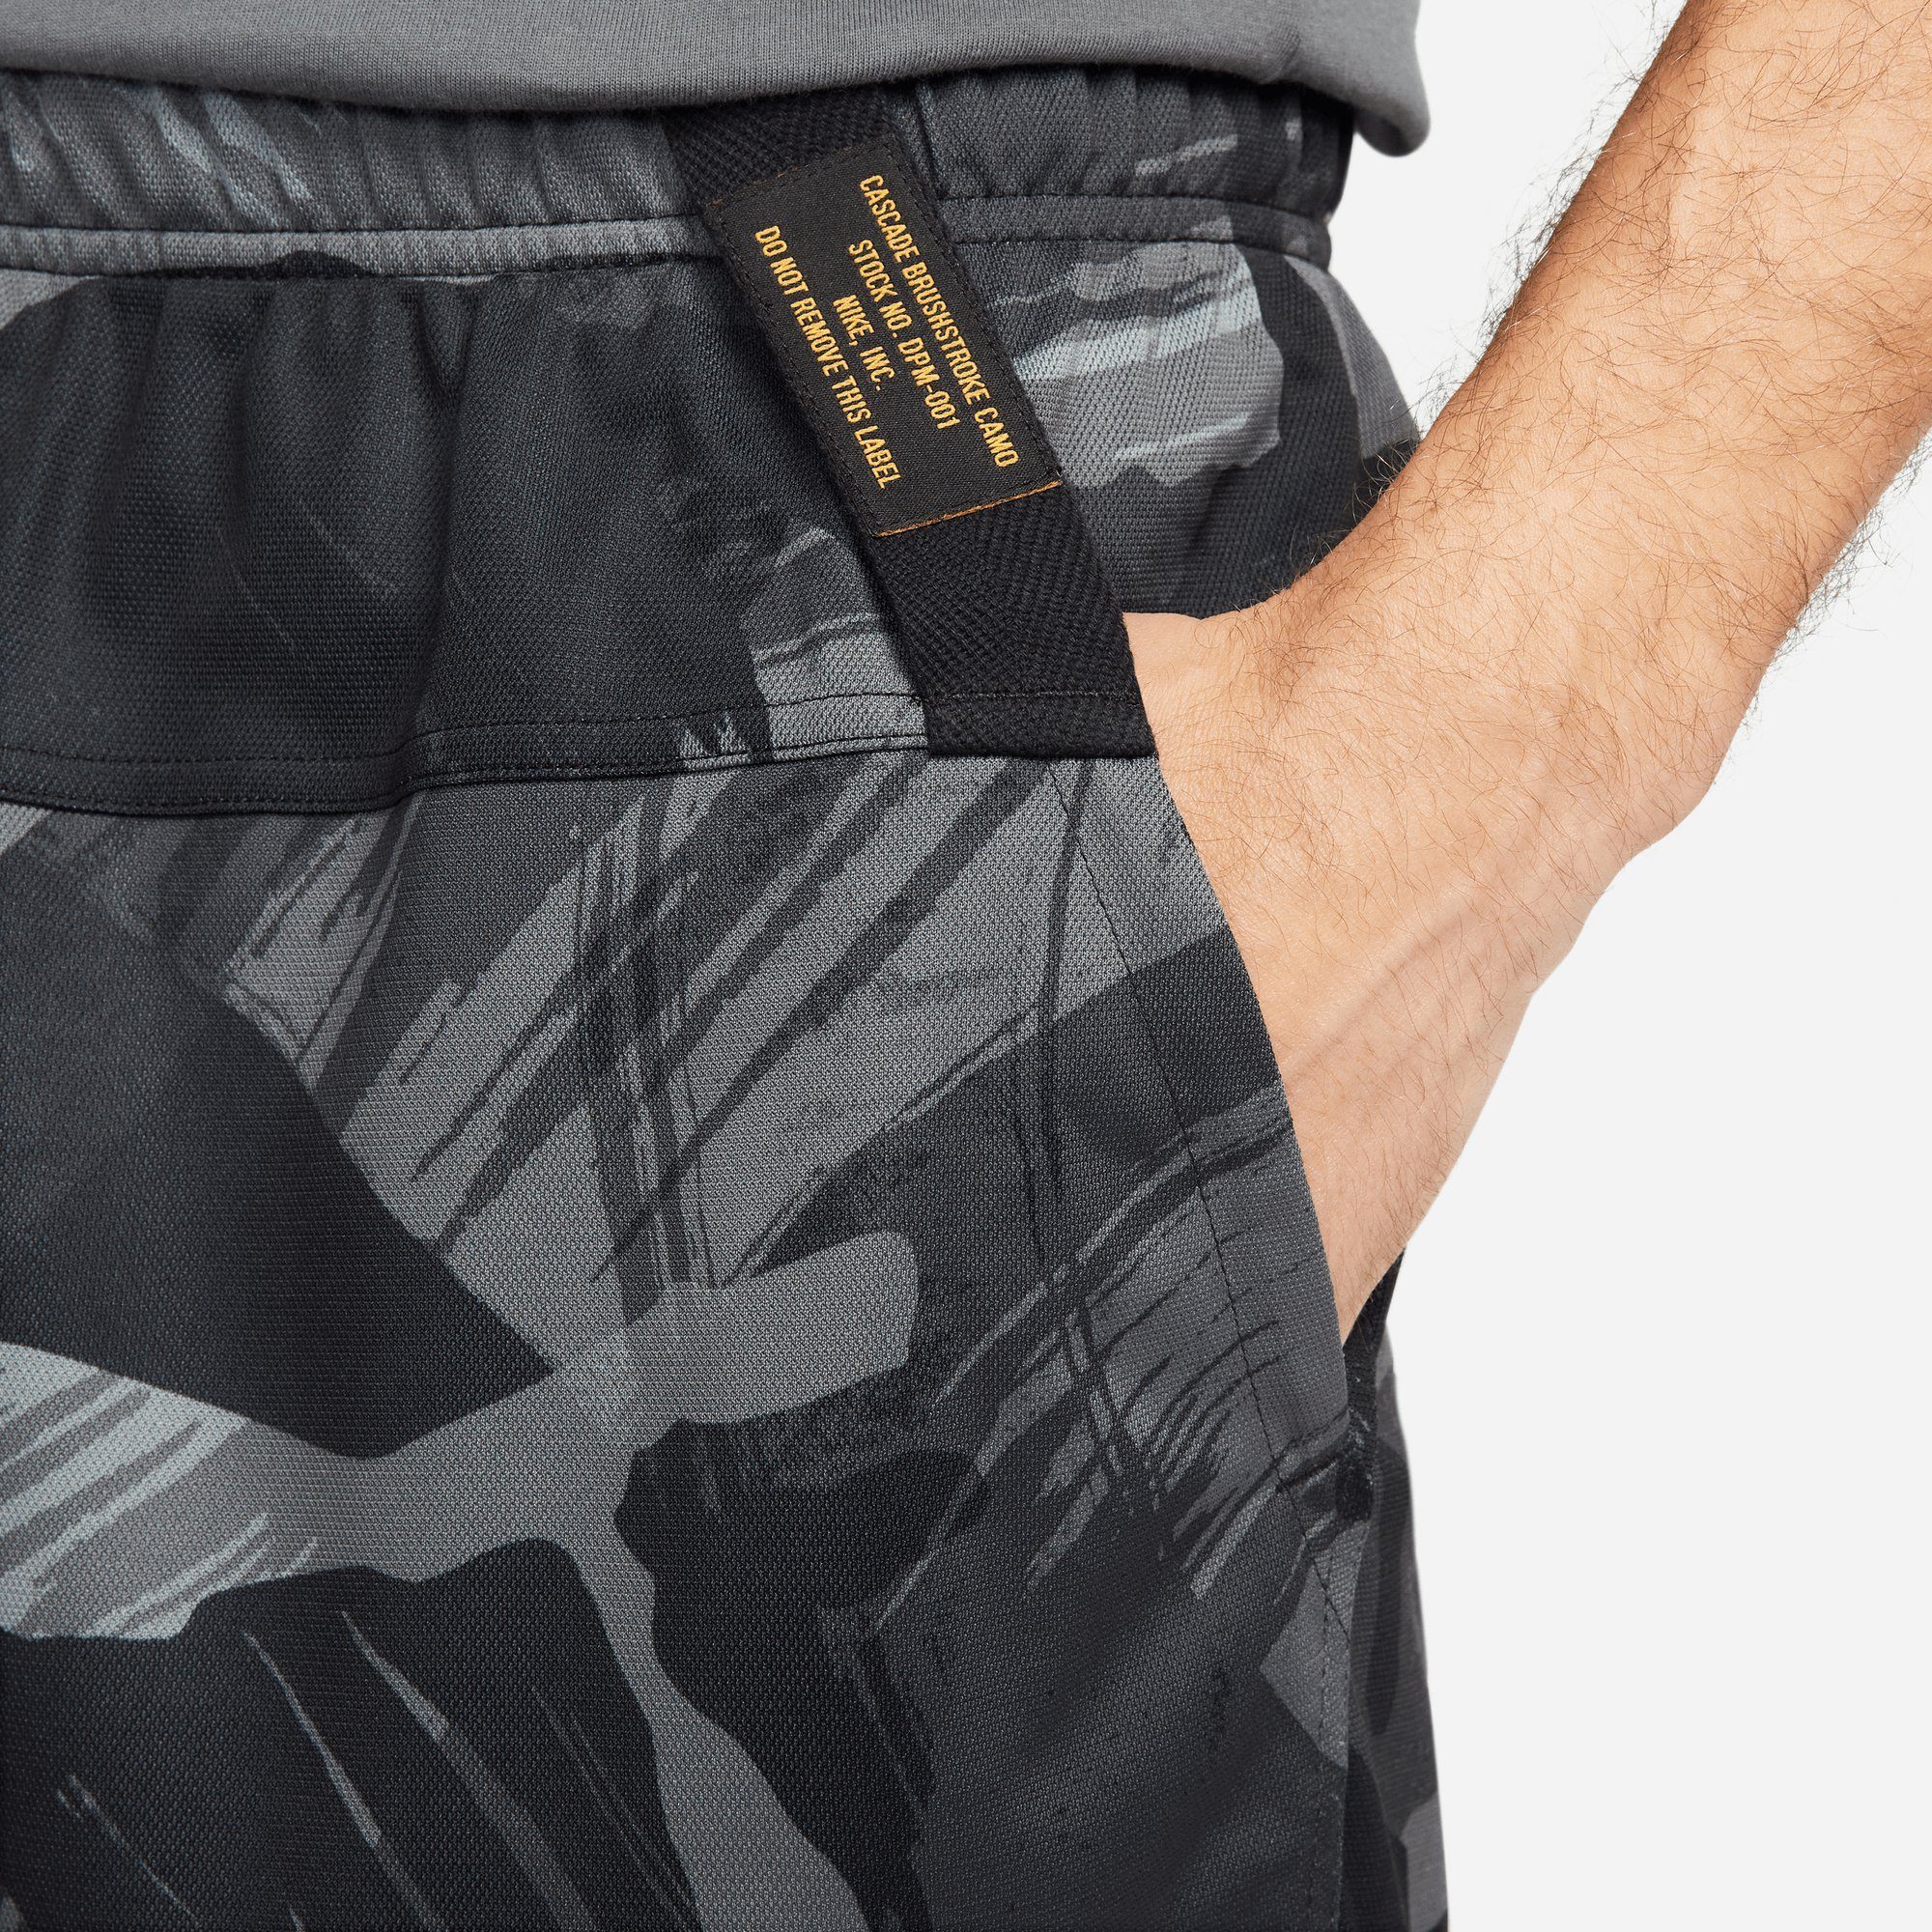 MILK TOTALITY SUEDE/COCONUT FITNESS MEN'S Trainingsshorts DRI-FIT CAMO SHORTS " UNLINED BLACK/GOLD Nike